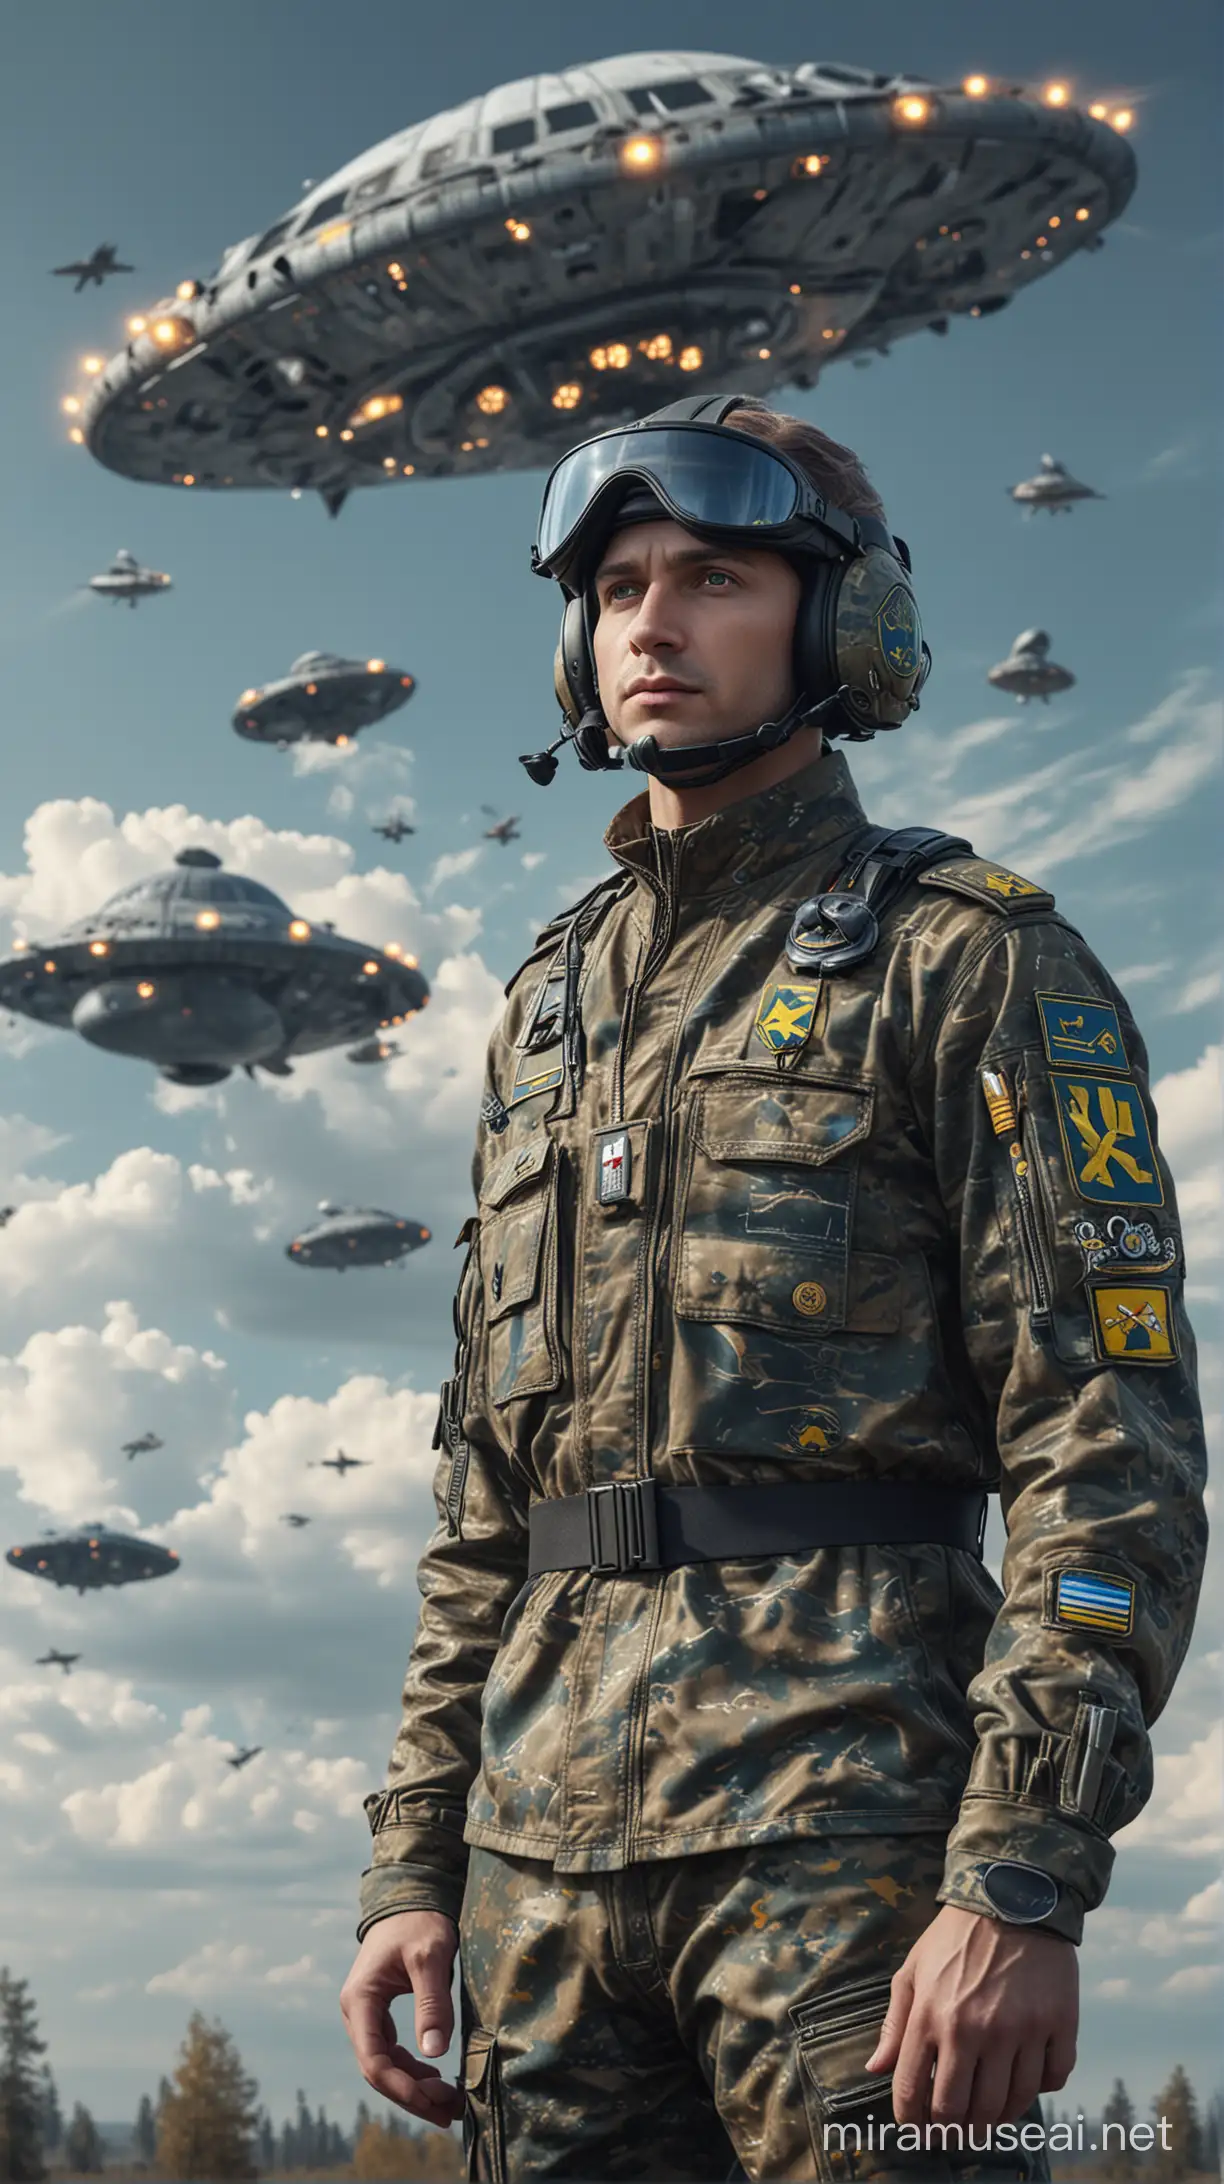 A pilot with Ukrainian symbols in a camouflage uniform and a UFO,Hyper-realistic, 8k image